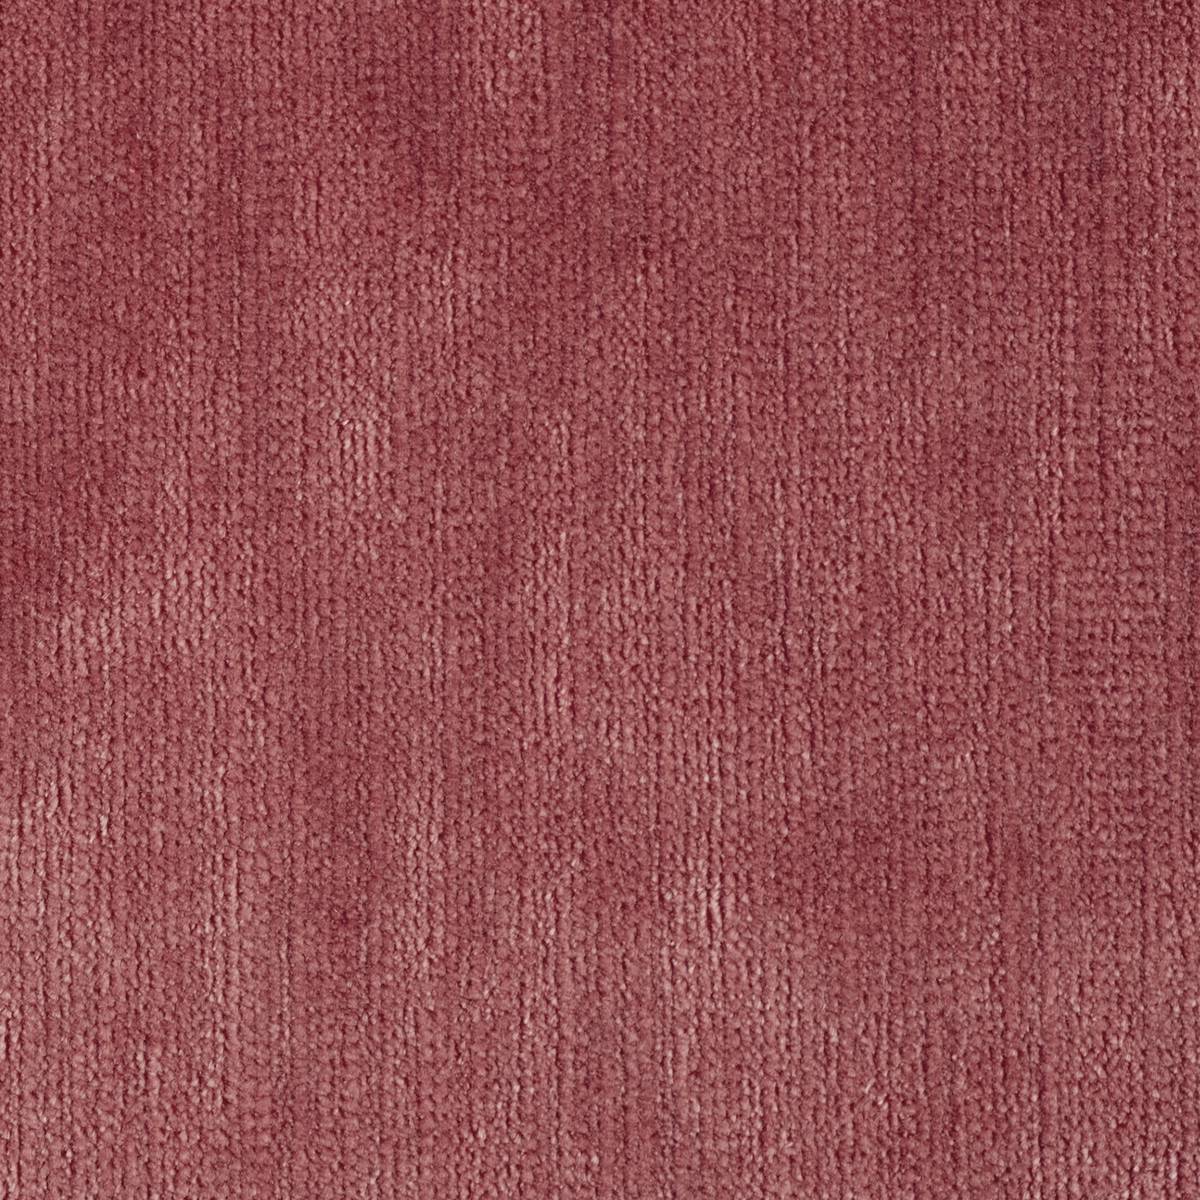 Momentum Velvets Coral Fabric by Harlequin